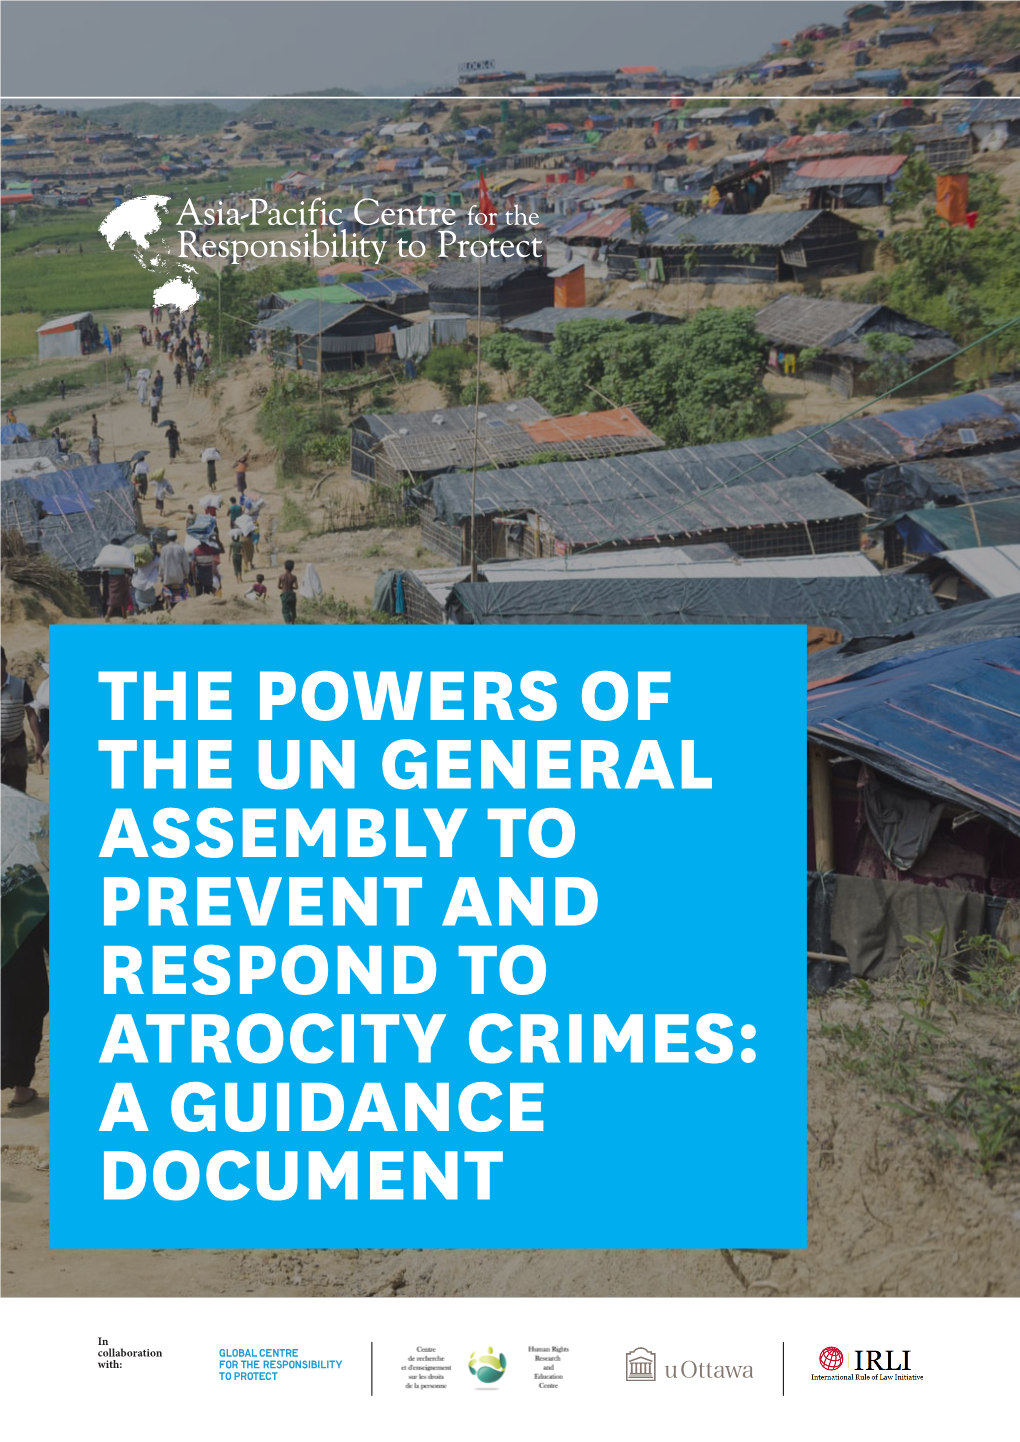 The Powers of the Un General Assembly to Prevent and Respond to Atrocity Crimes: a Guidance Document